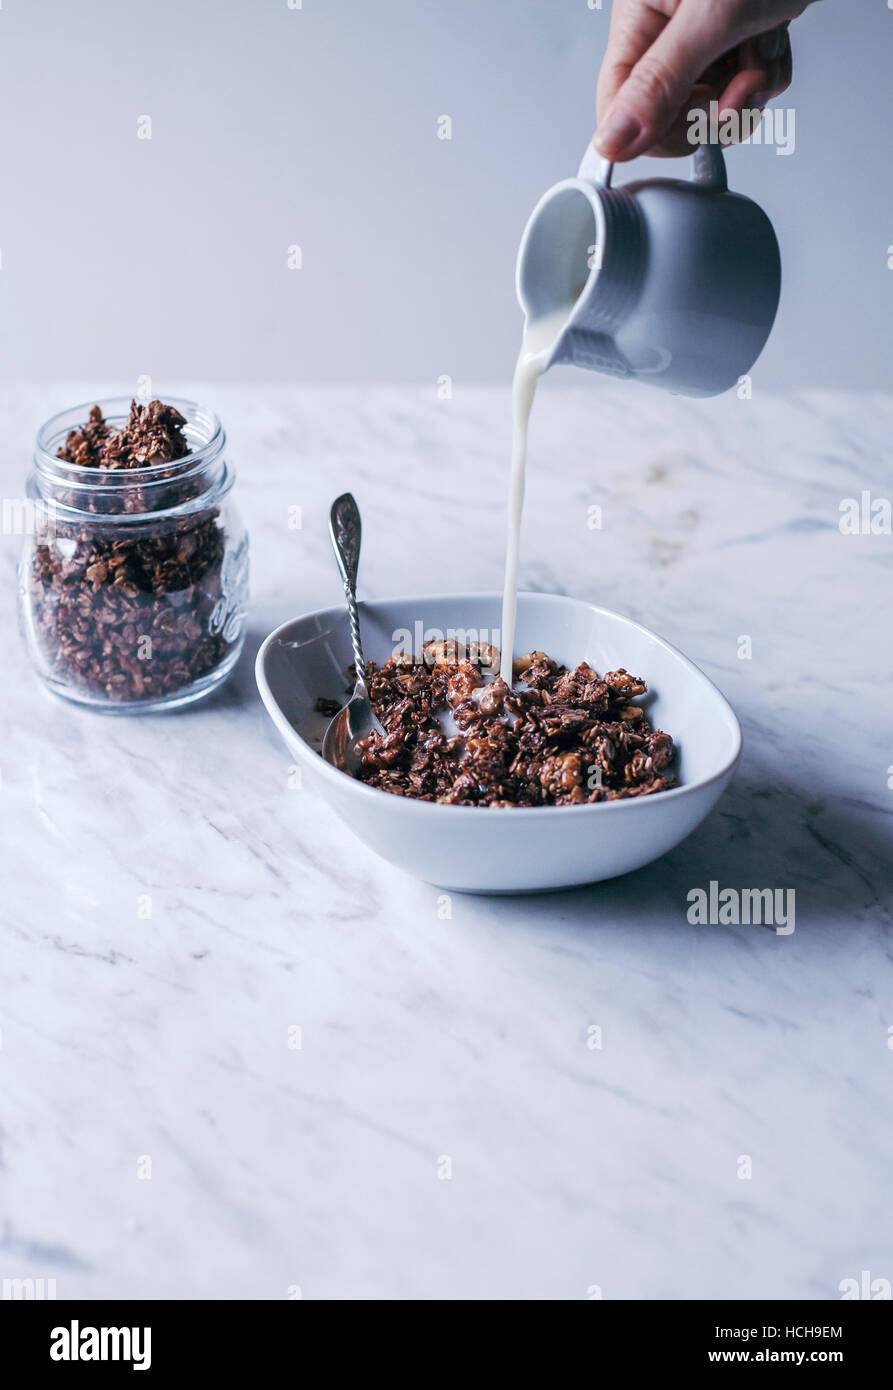 Woman pouring almond milk into a bowl of homemade chocolate granola with oats, nuts and seeds Stock Photo